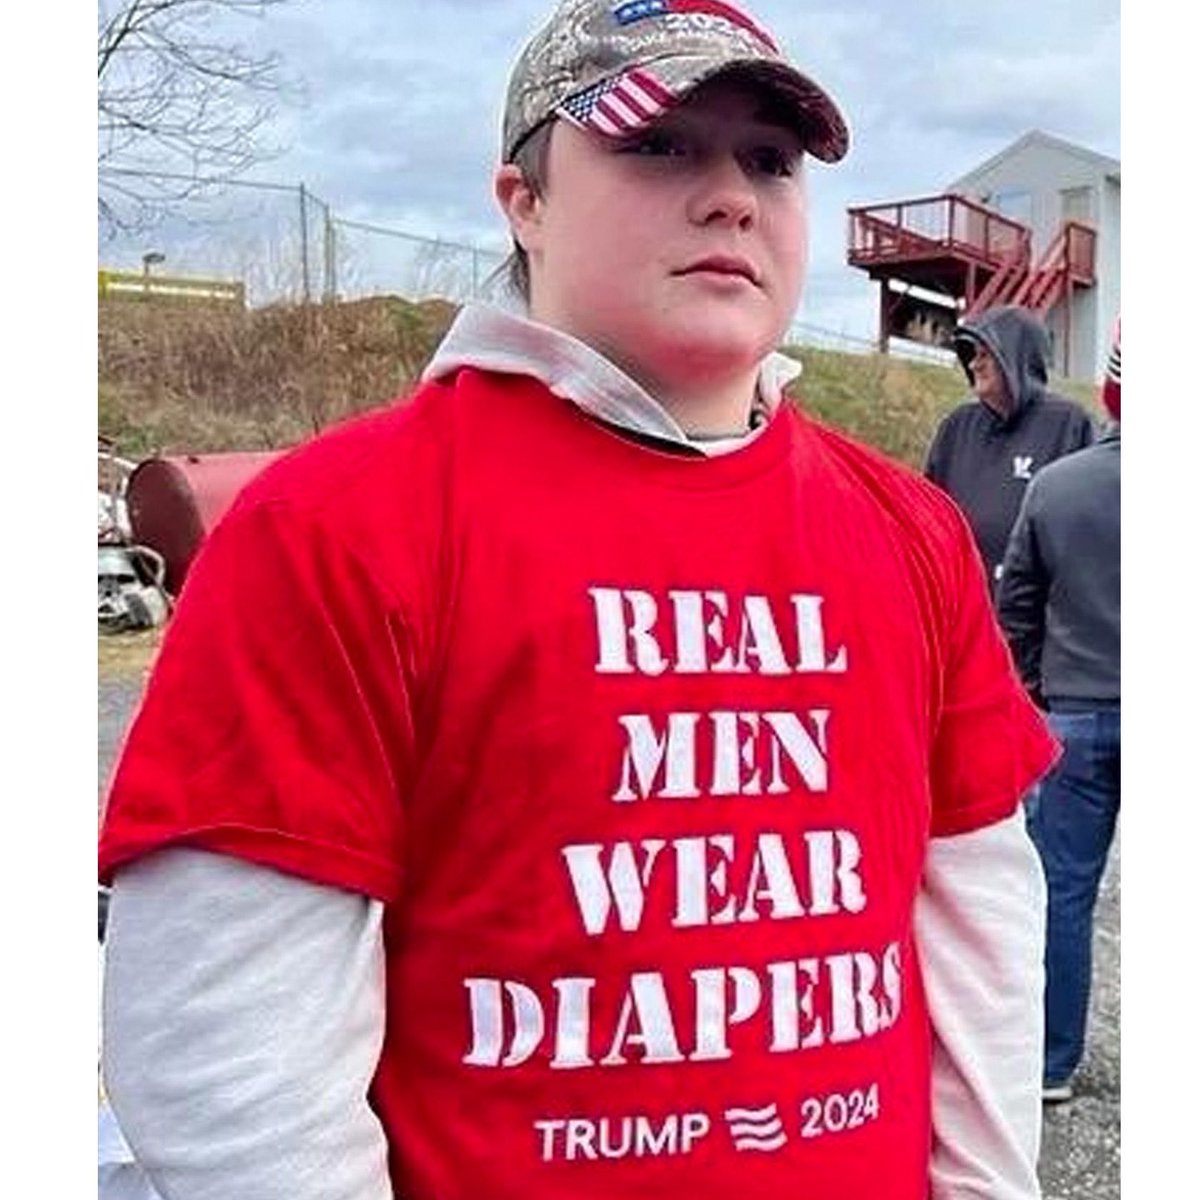 This…might be #MAGA ROCK “BOTTOM”. Well, I don’t think our founding fathers imagined the @GOP would come to this! #MAGADiapers #VoteBidenHarris2024 #VoteBlue2024 #MAGACultMorons #DiaperDon #TrumpisaNationalDisgrace #TrumpIsNotFitToBePresident #BabiesWearDiapers #Trump